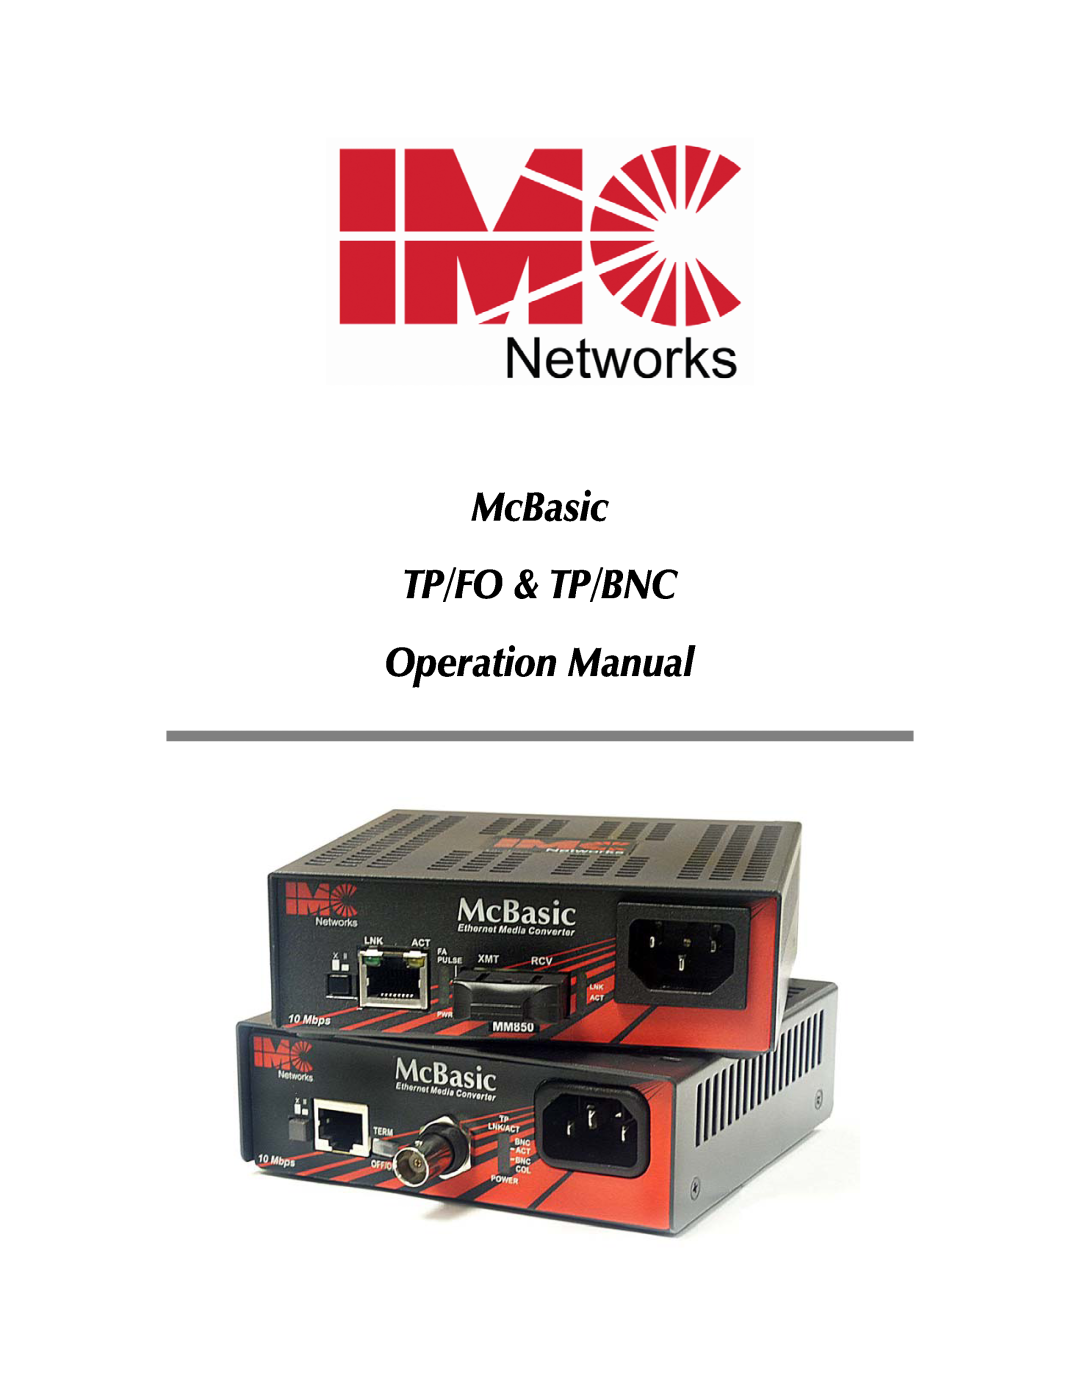 IMC Networks SP50 operation manual 